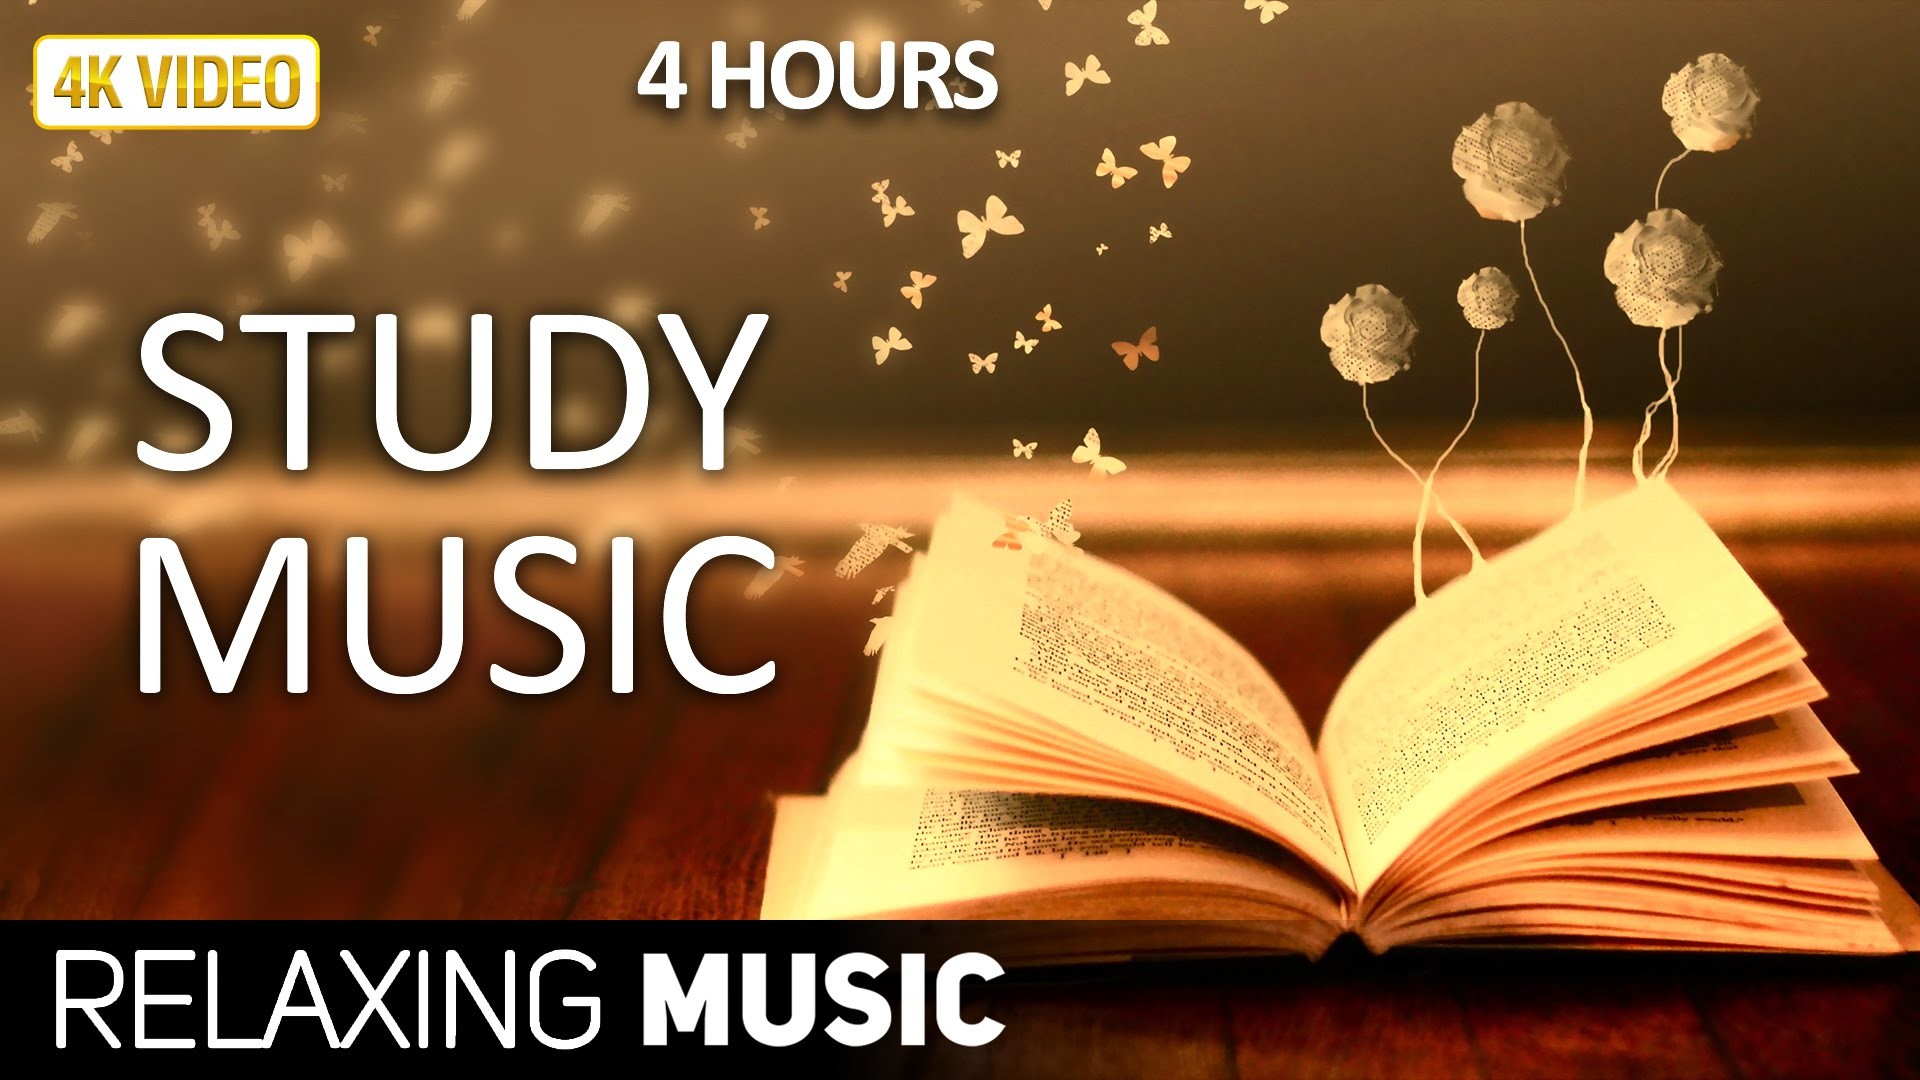 1920x1080 Studying Music For Better Concentration And Memory, Final Exam Study Time,  Motivation Music - YouTube